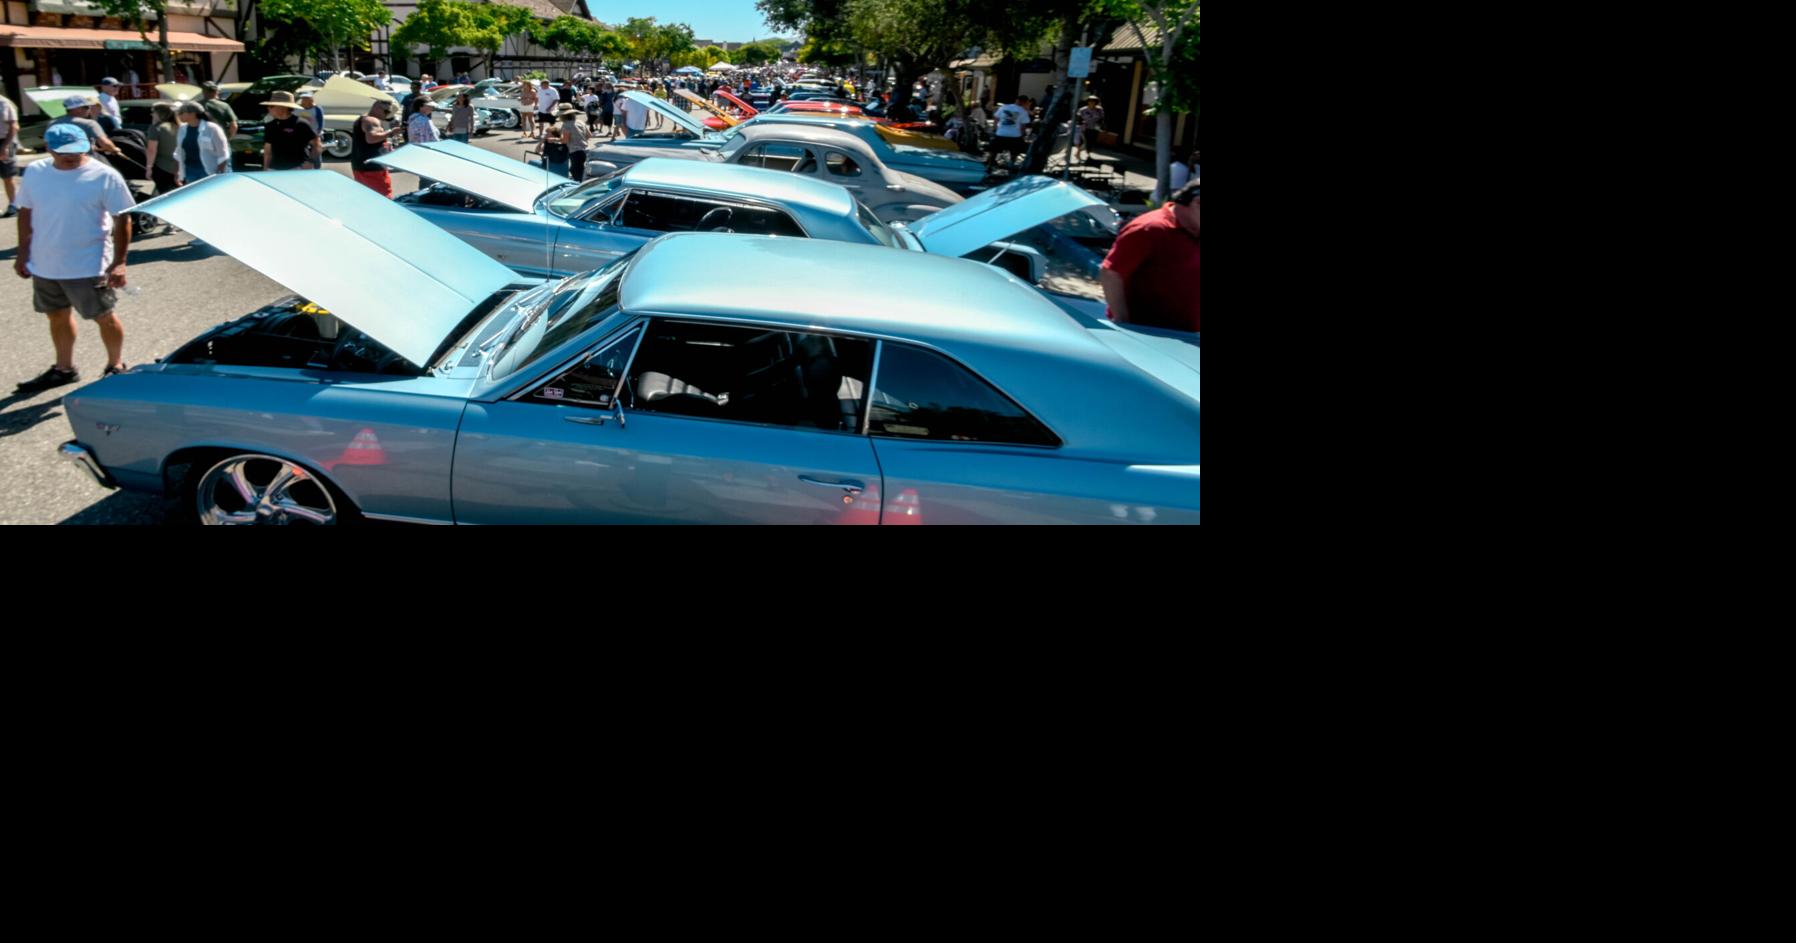 Photos from Saturday’s Wheels ‘N’ Windmills car show in Solvang |